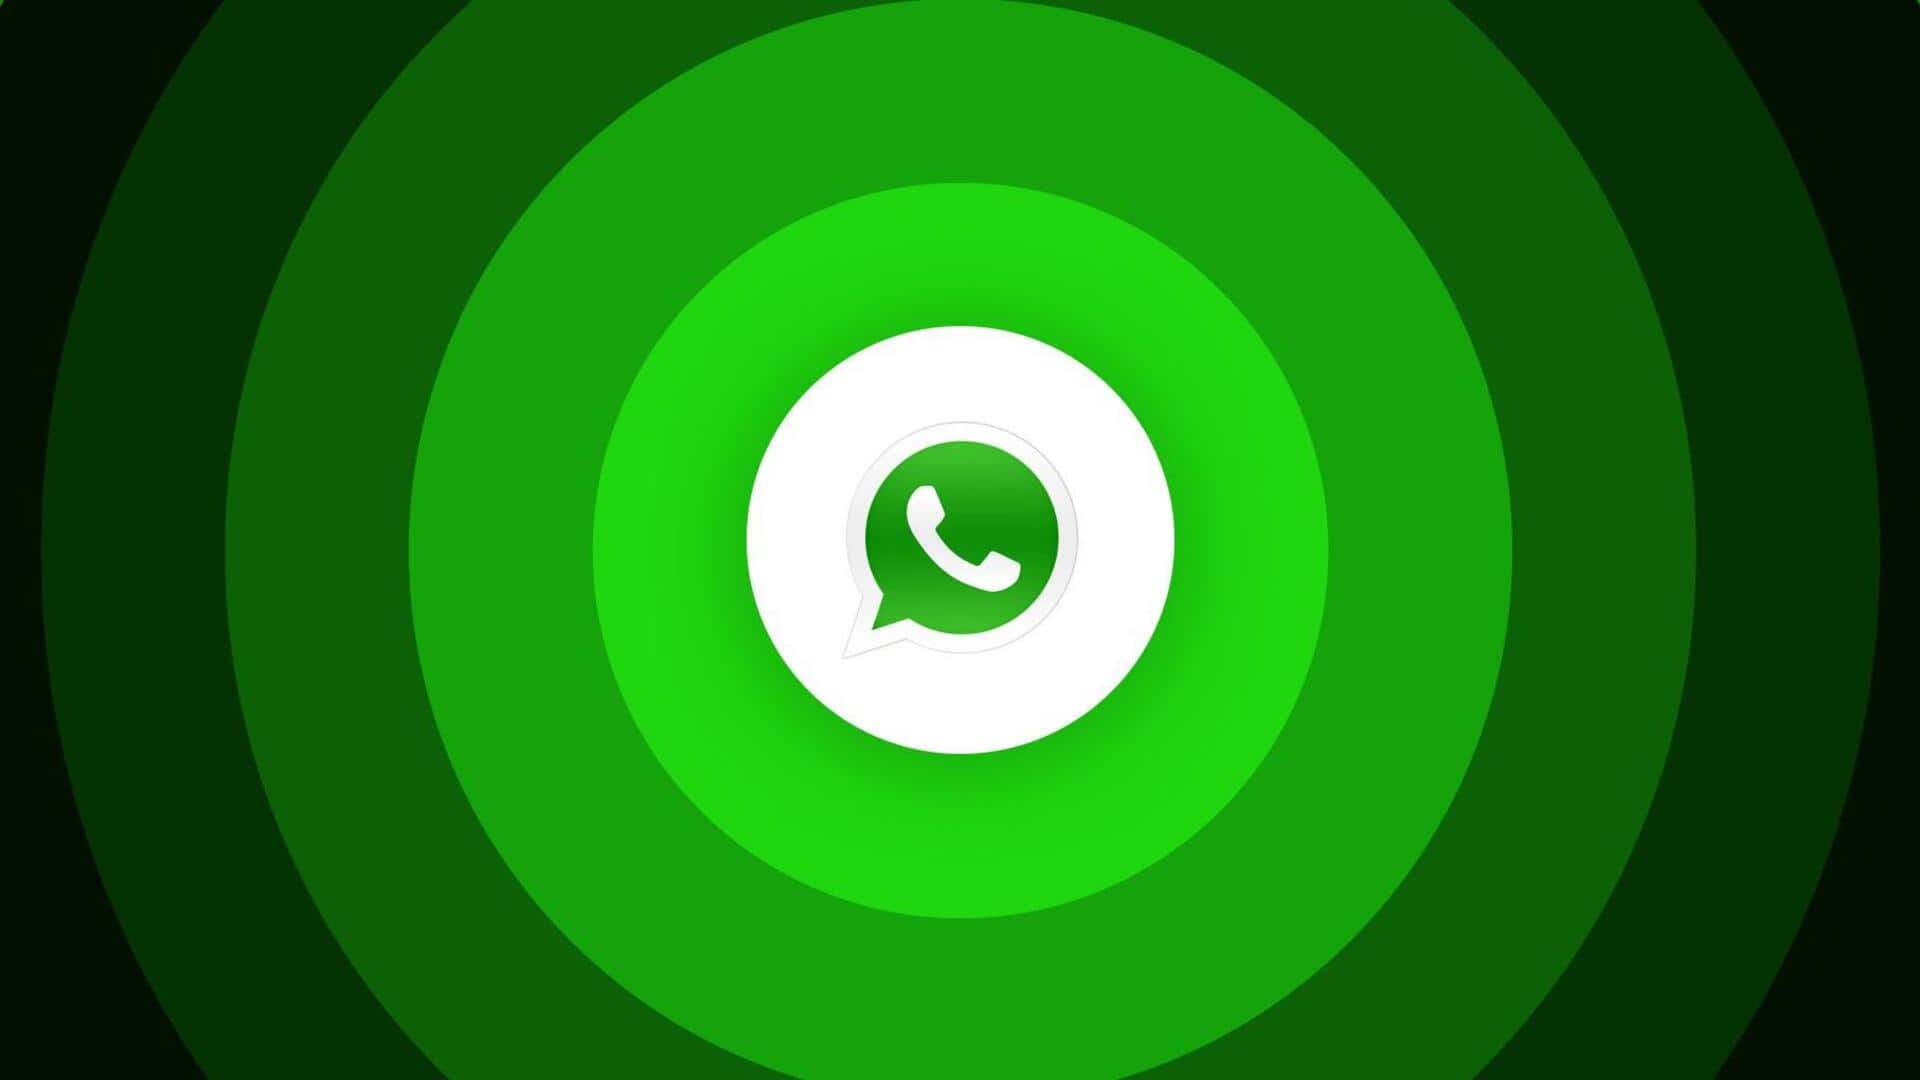 WhatsApp now working on event reminders for community groups